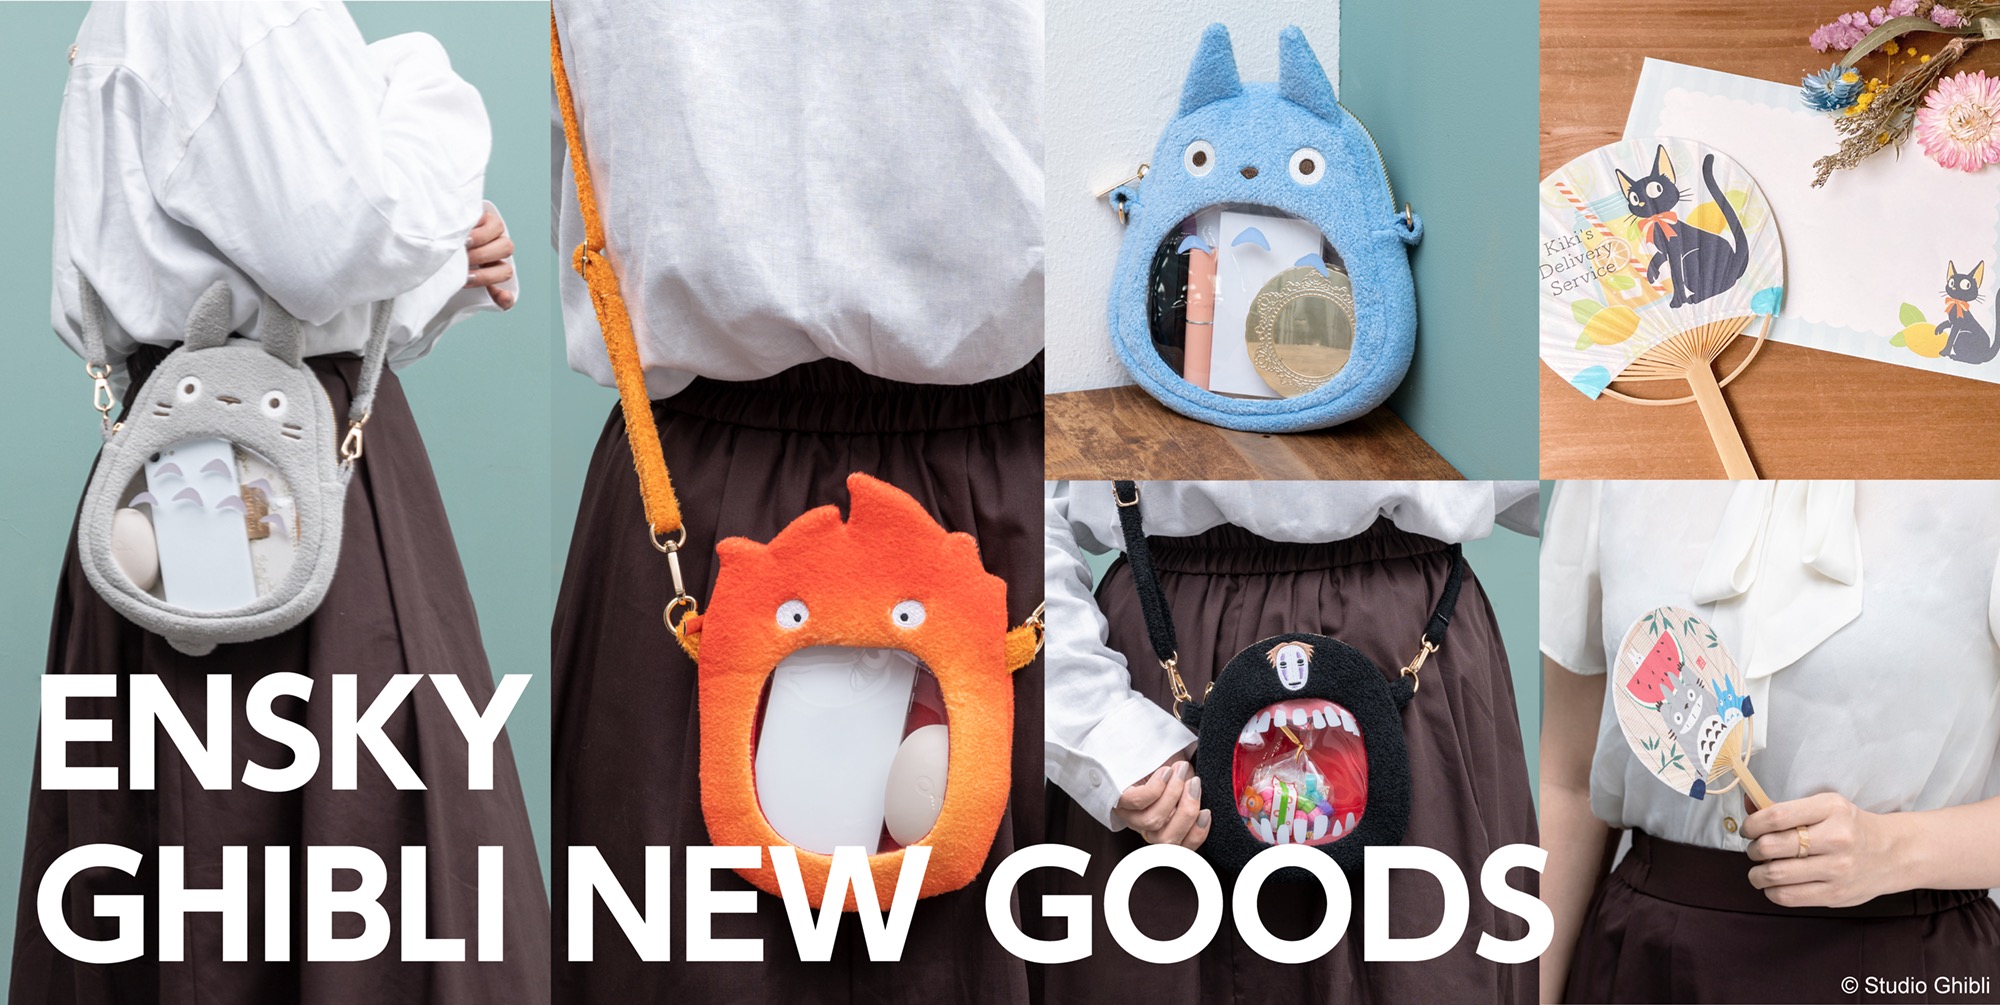 https://soranews24.com/wp-content/uploads/sites/3/2023/06/Studio-Ghibli-bags-fashion-accessories-My-Neighbor-Totoro-Kikis-Delivery-Service-Spirited-Away-Howls-Moving-Castle-No-Face-Calcifer-cute-merchandise-shop-Ensky-buy-news-photos-79.jpg